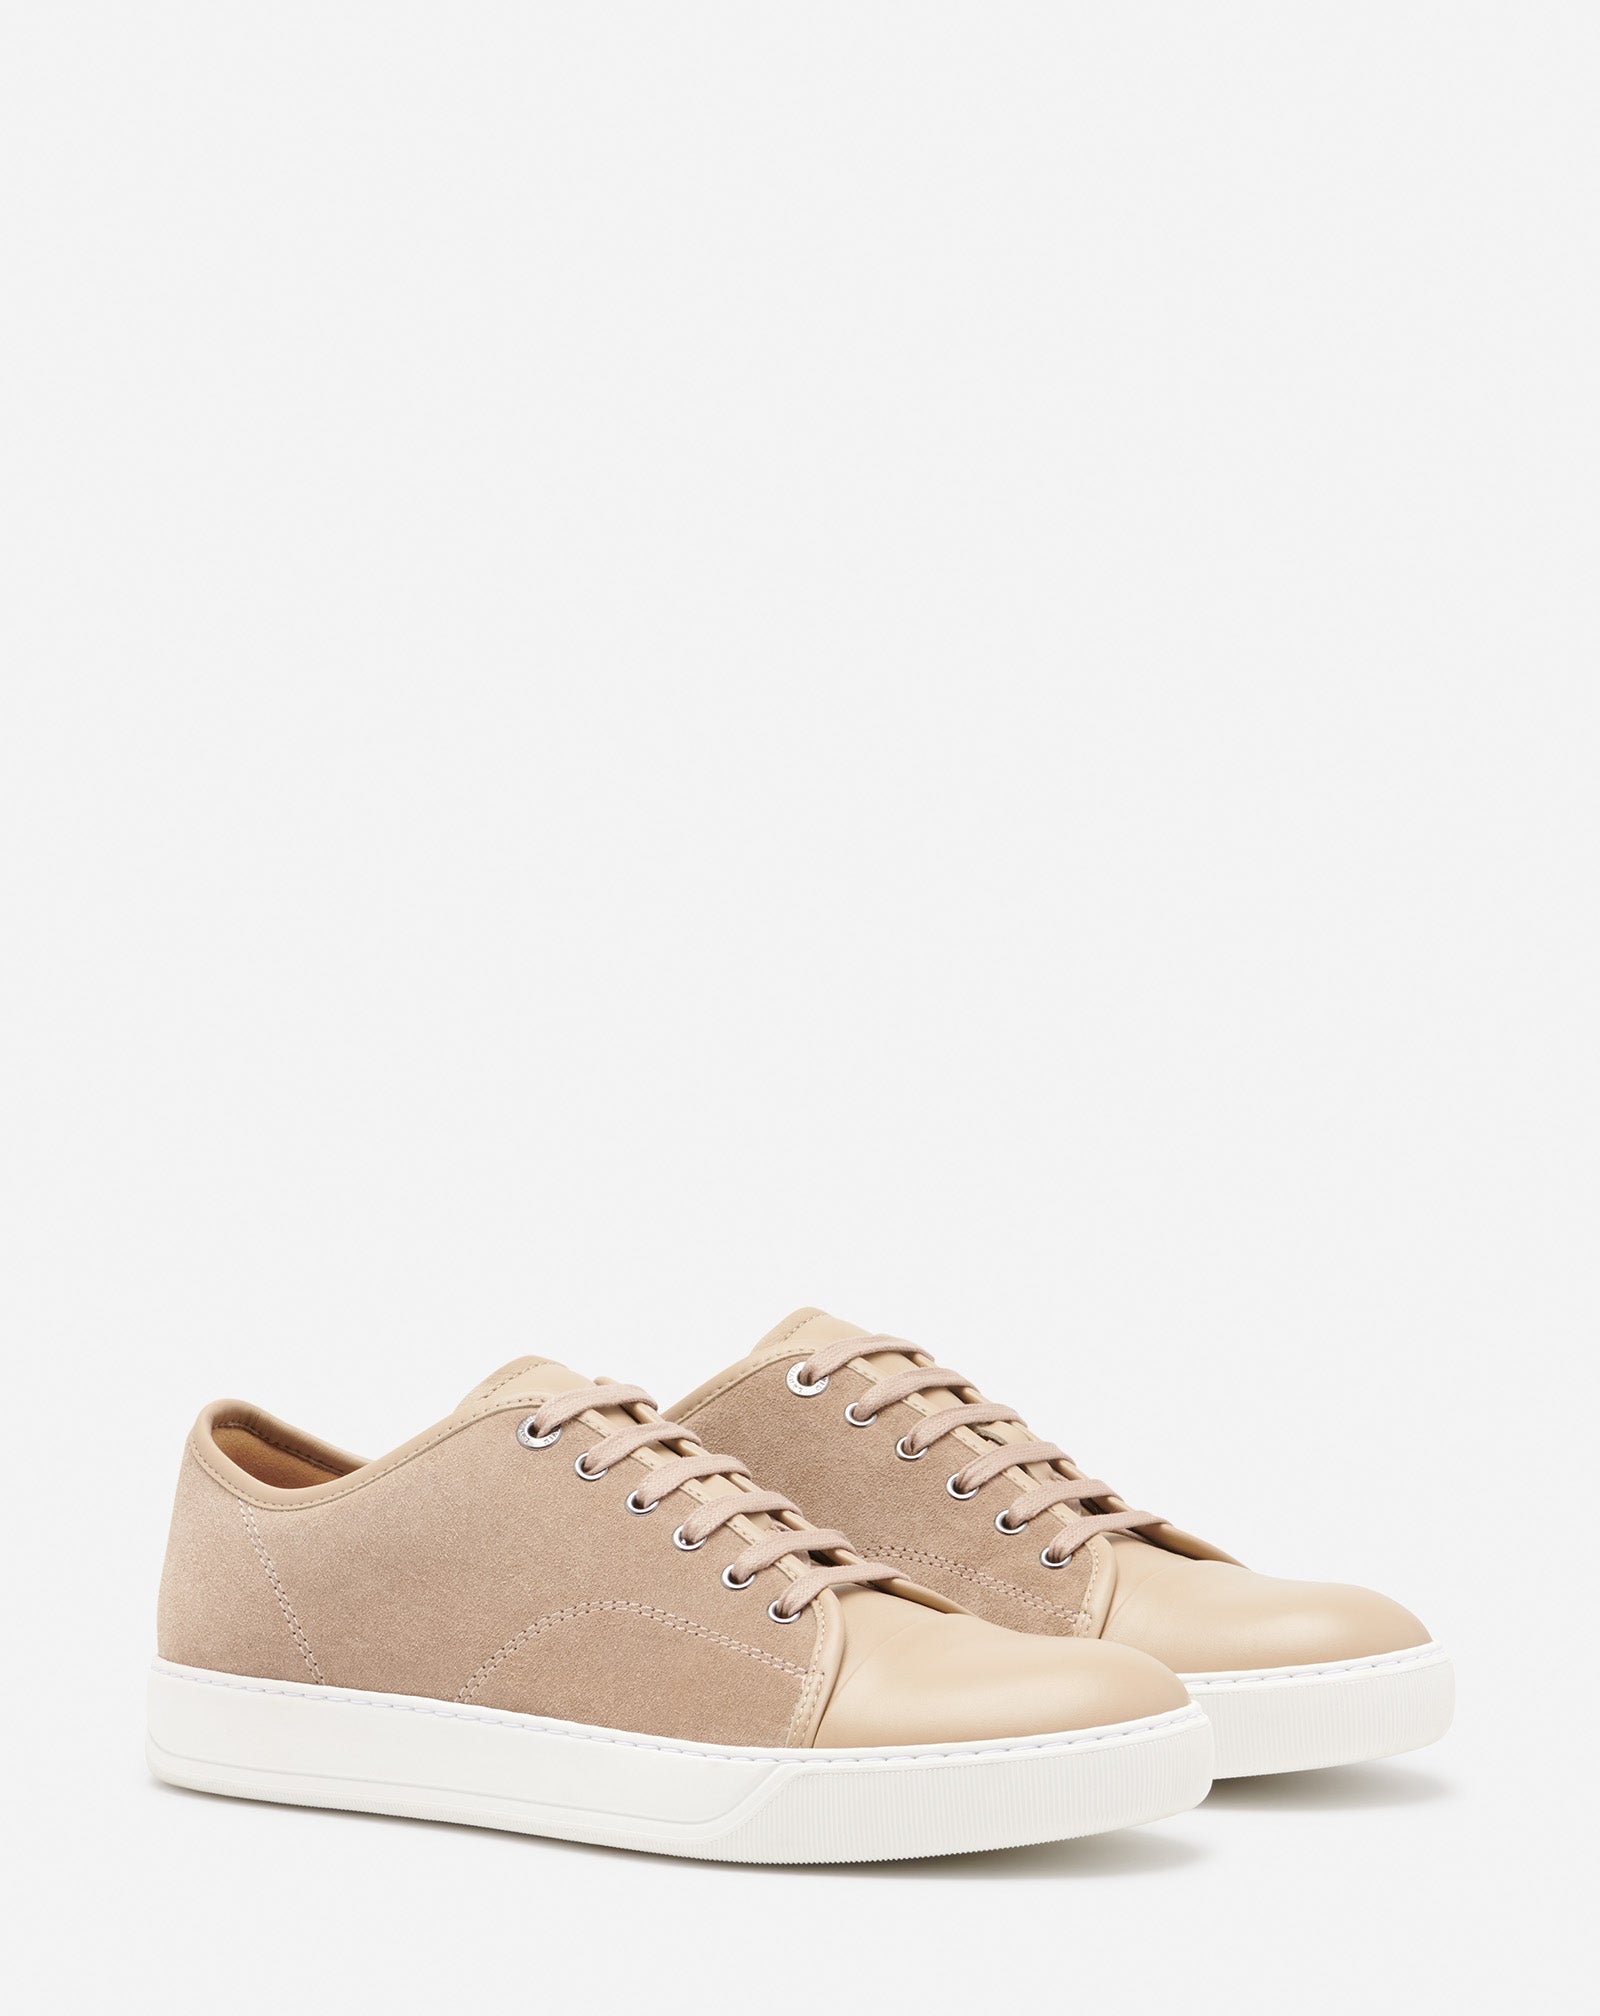 DBB1 LEATHER AND SUEDE SNEAKERS TAUPE | Lanvin – LANVIN